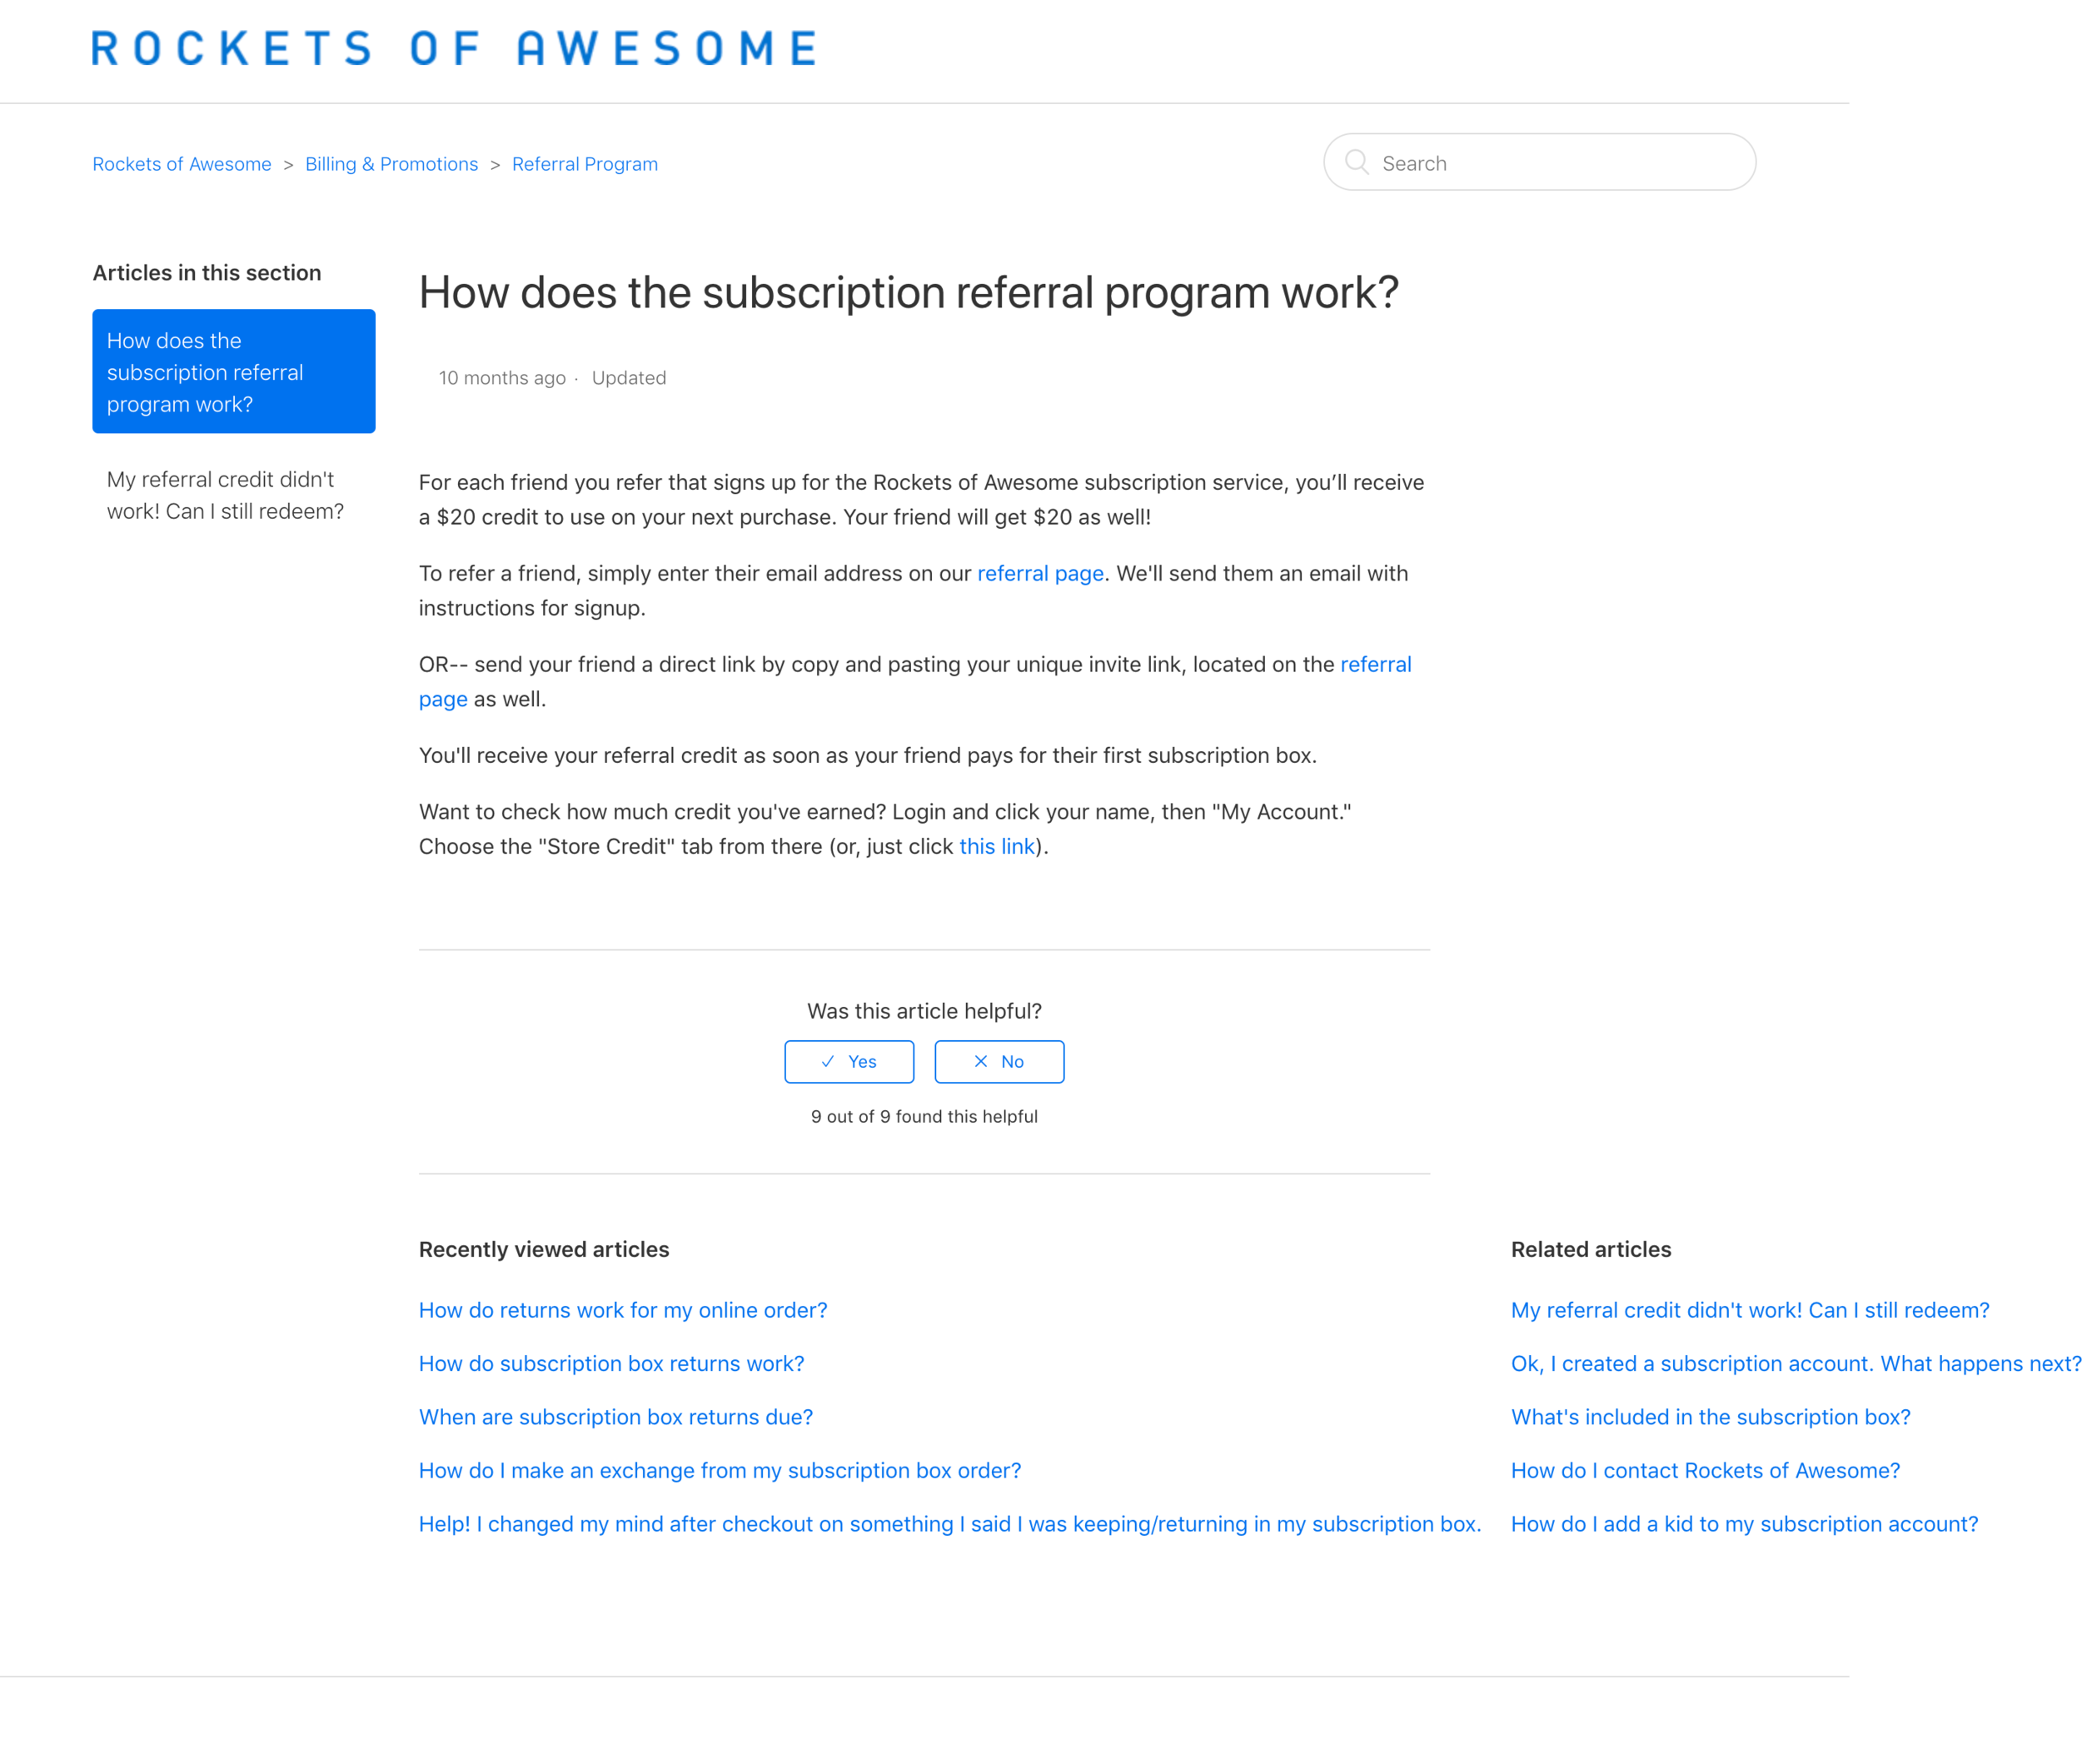 screencapture-support-rocketsofawesome-hc-en-us-articles-115010799188-How-does-the-subscription-referral-program-work-2020-01-04-18_24_30.png